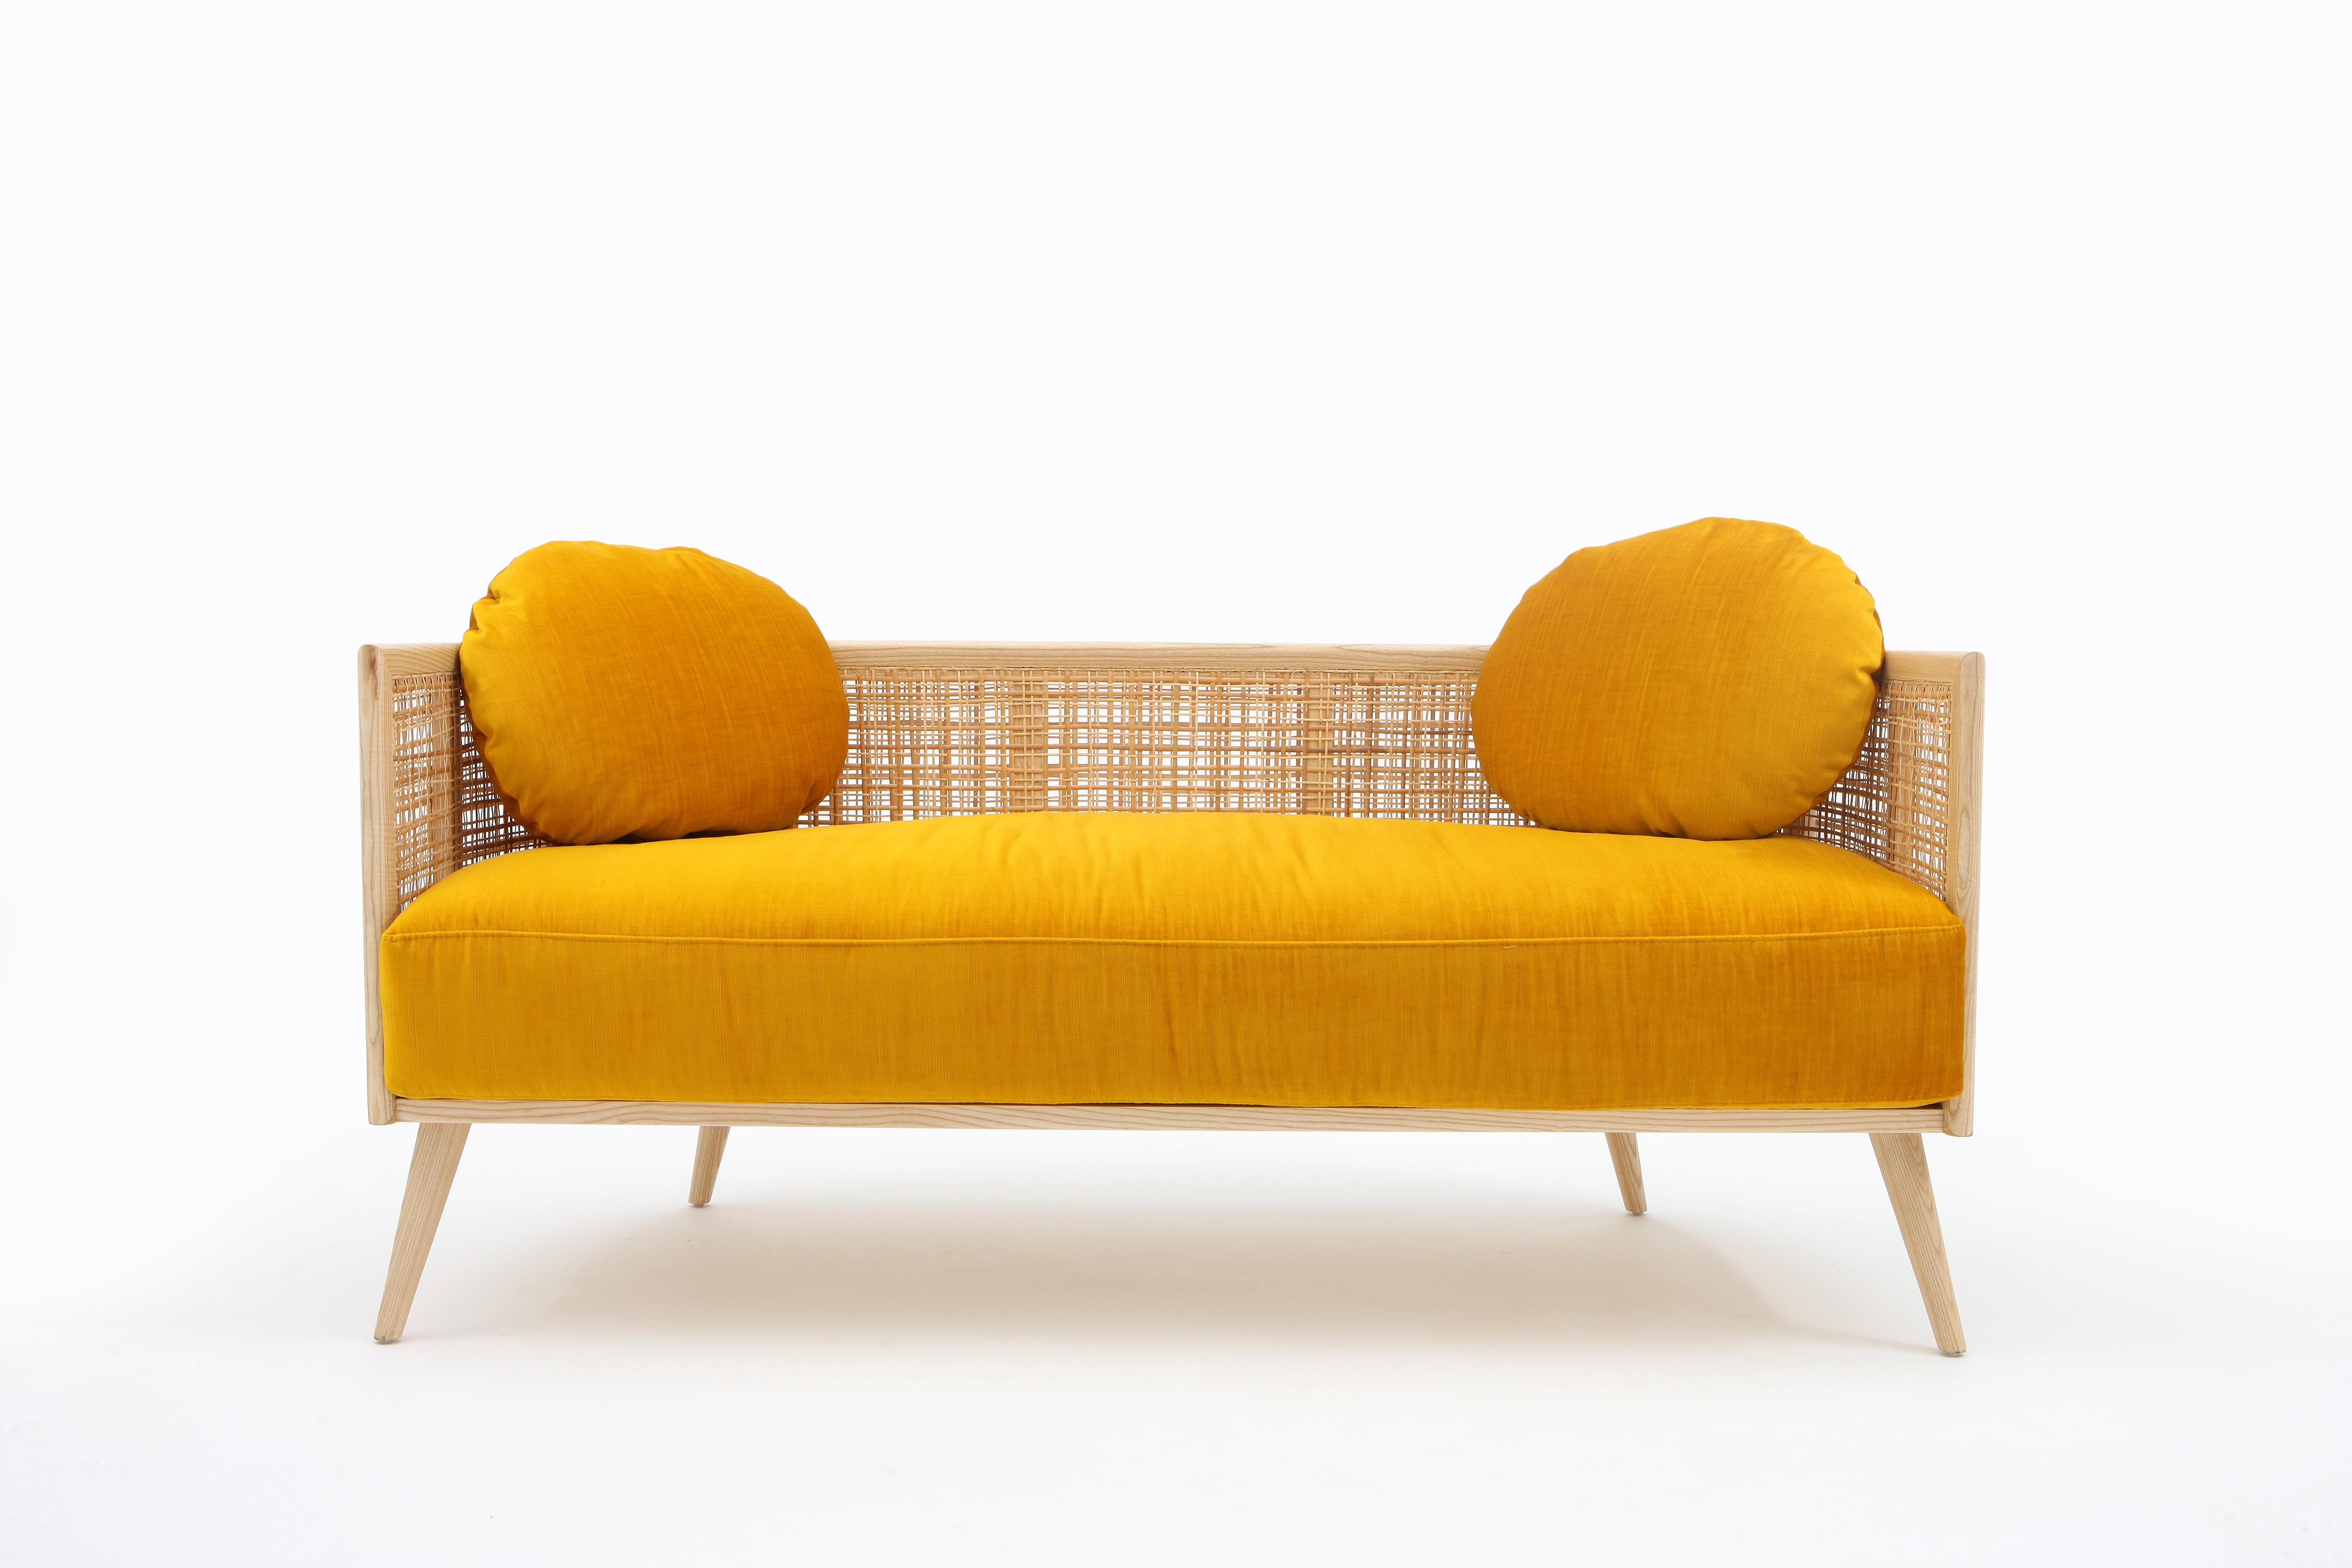 Lebanese Summerland Sofa in solid ash wood and straw weaving pattern For Sale